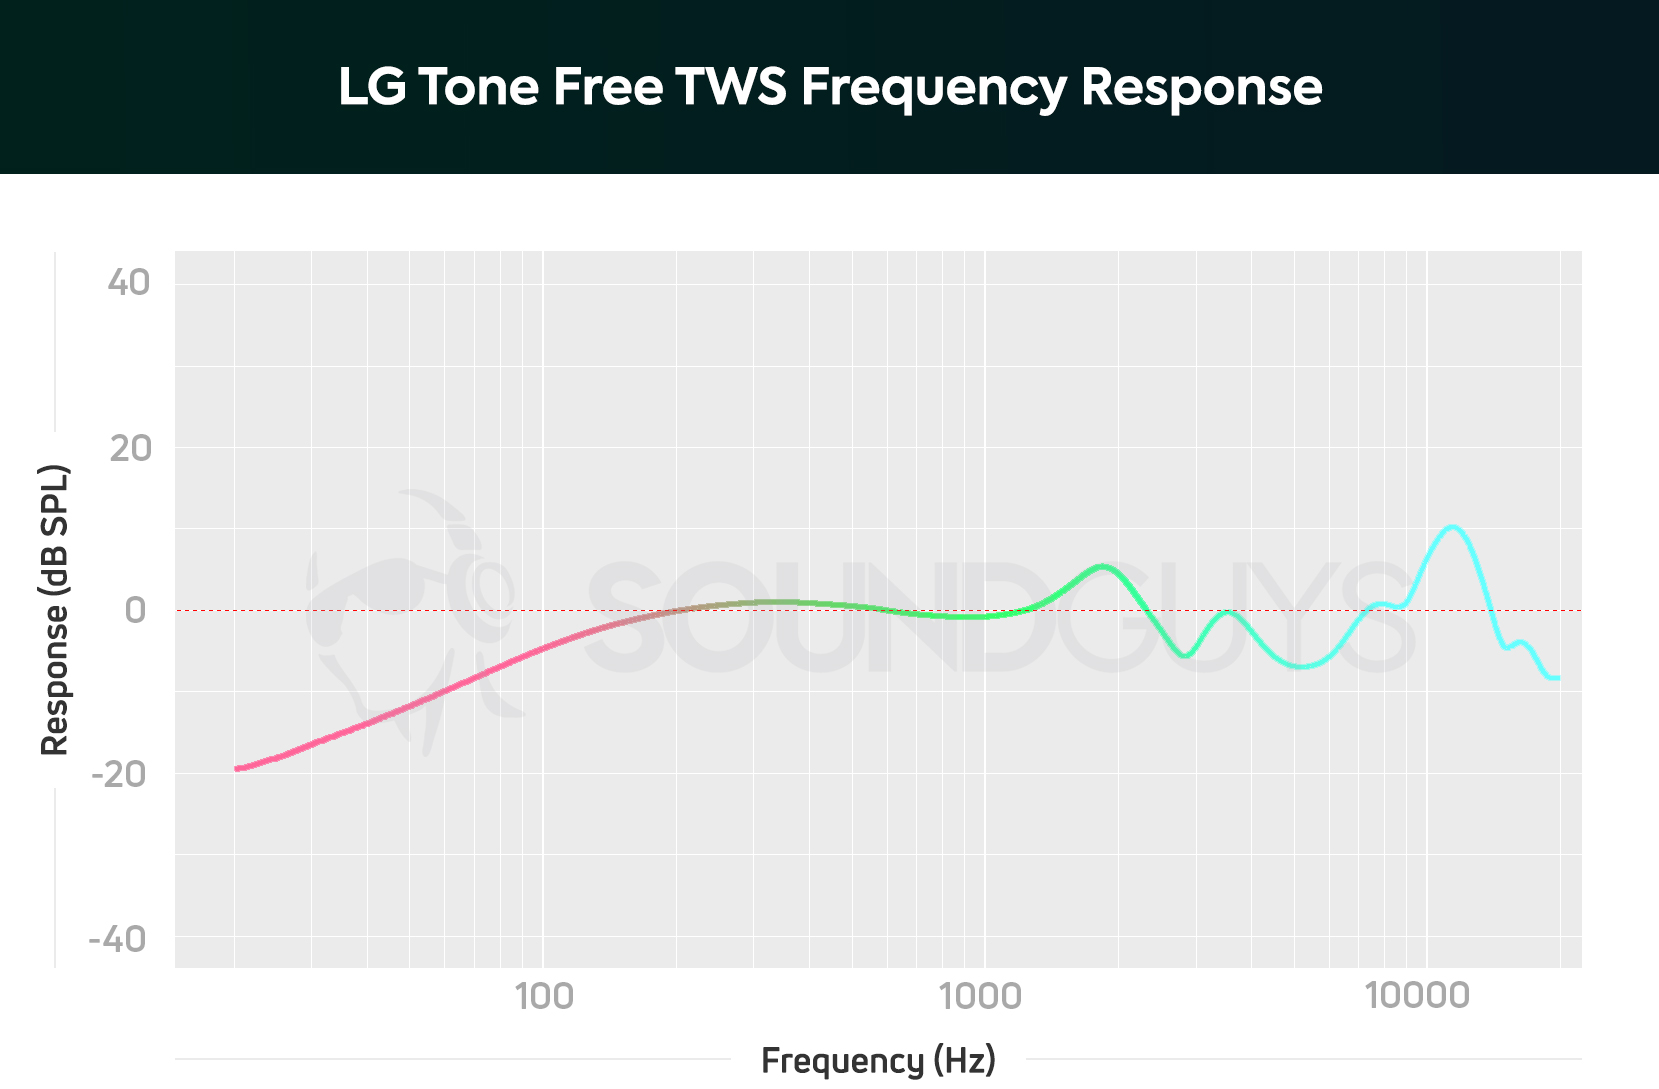 A chart depicting the LG Tone Free HBS FL7 frequency response.